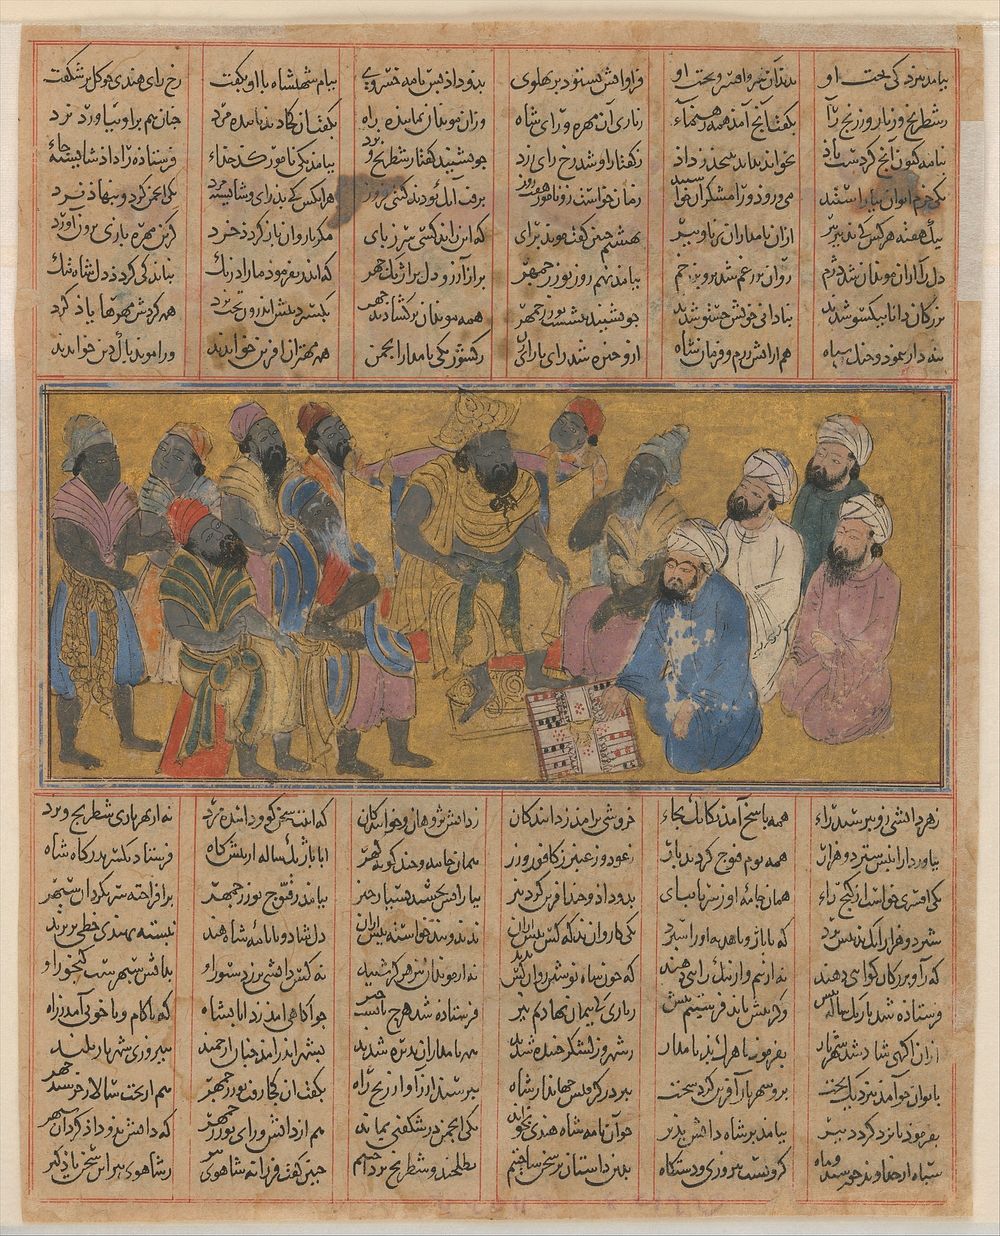 Buzurjmihr Explains the Game of Backgammon (Nard) to the Raja of Hind", Folio from the First Small Shahnama (Book of Kings)…